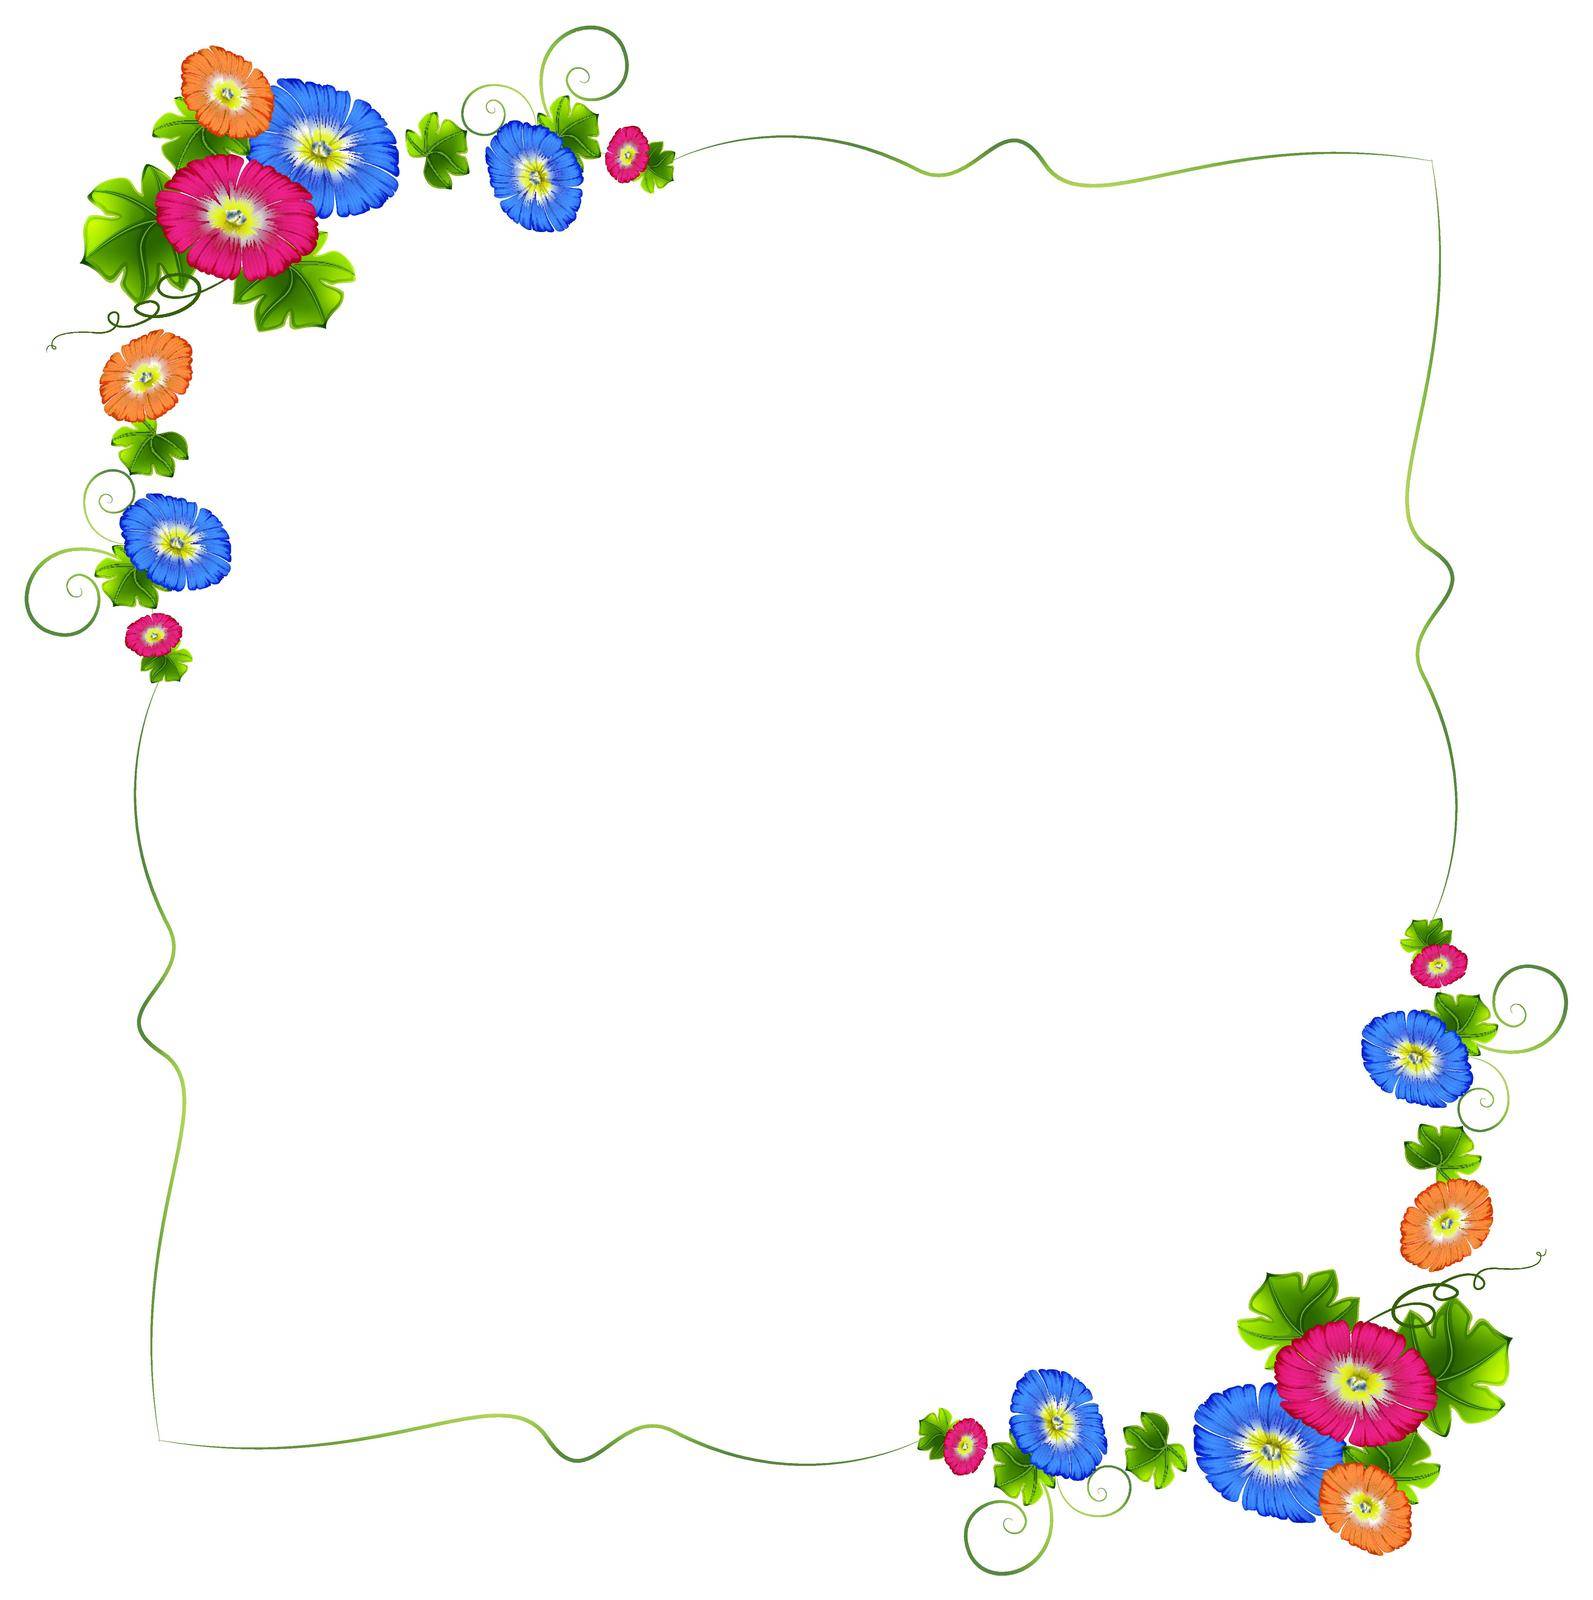 Illustration of a border design with fresh colorful flowers on a white background